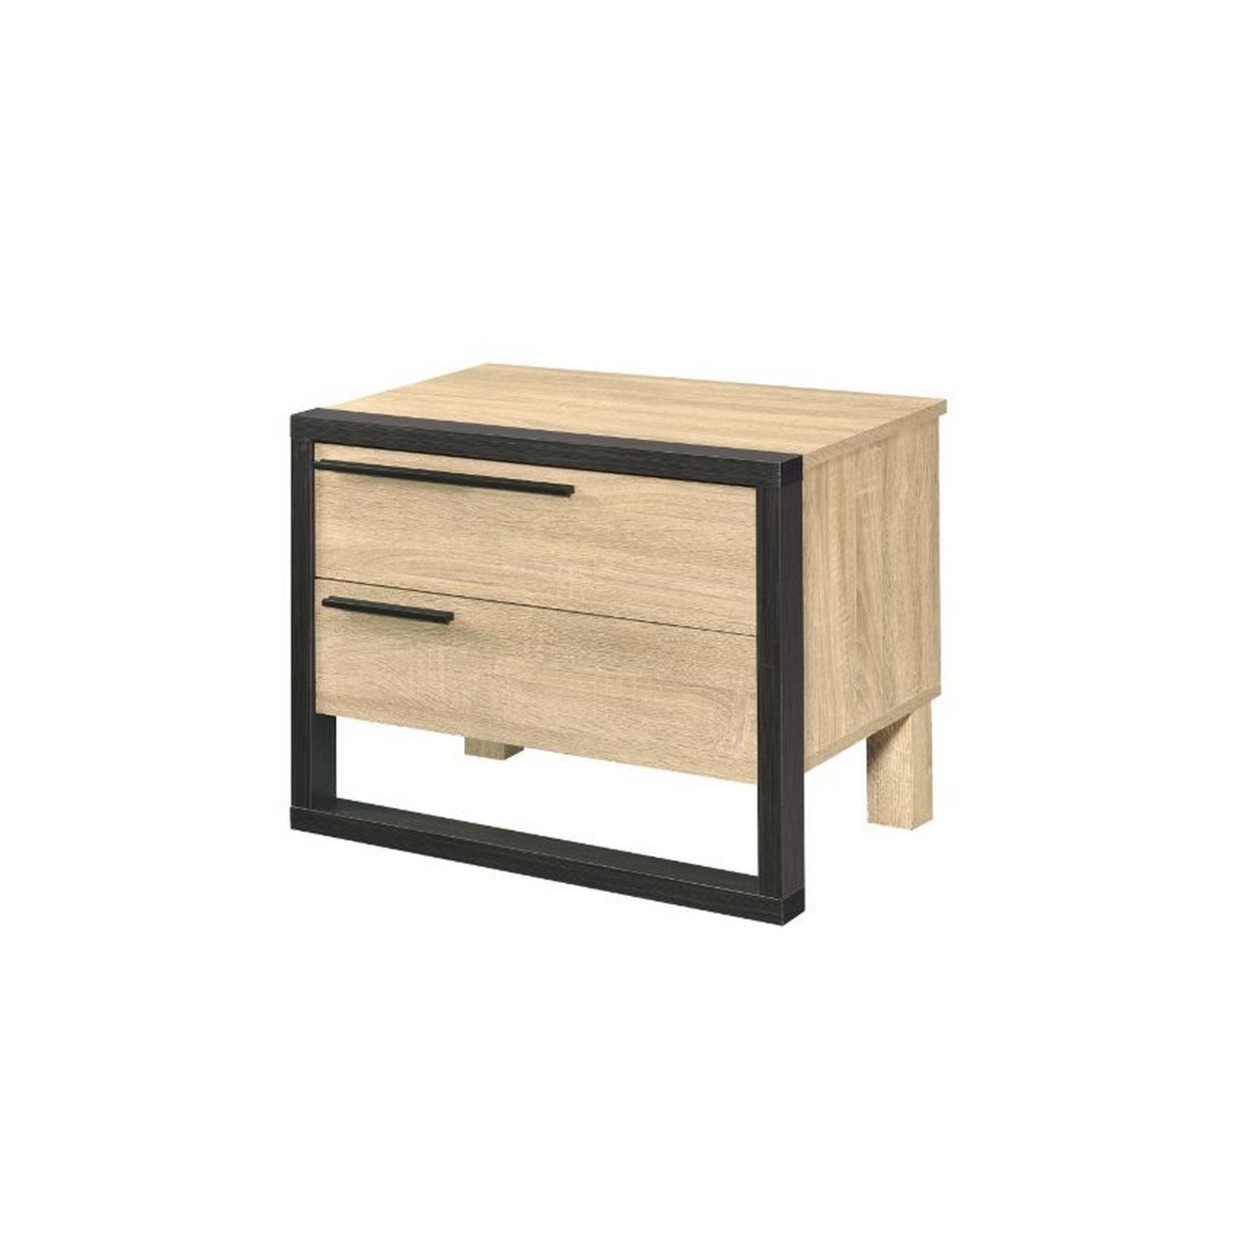 Accent Table With A Pull Out Tray And 2 Storage Drawers, Brown And Black- Saltoro Sherpi